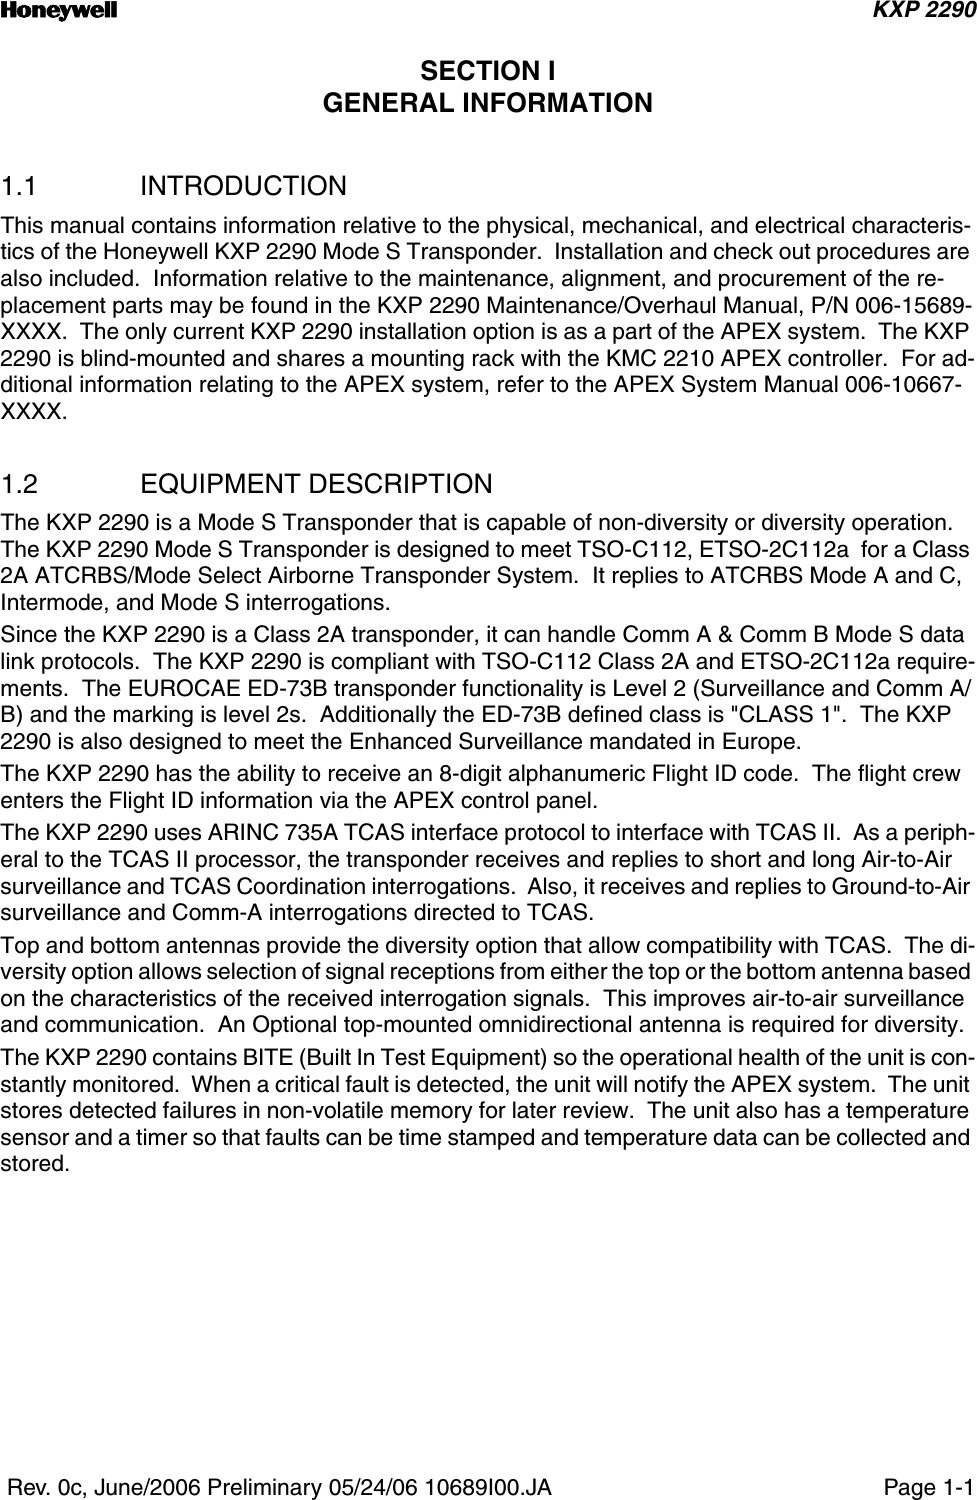 n KXP 2290 Rev. 0c, June/2006 Preliminary 05/24/06 10689I00.JA Page 1-1SECTION IGENERAL INFORMATION1.1 INTRODUCTIONThis manual contains information relative to the physical, mechanical, and electrical characteris-tics of the Honeywell KXP 2290 Mode S Transponder.  Installation and check out procedures are also included.  Information relative to the maintenance, alignment, and procurement of the re-placement parts may be found in the KXP 2290 Maintenance/Overhaul Manual, P/N 006-15689-XXXX.  The only current KXP 2290 installation option is as a part of the APEX system.  The KXP 2290 is blind-mounted and shares a mounting rack with the KMC 2210 APEX controller.  For ad-ditional information relating to the APEX system, refer to the APEX System Manual 006-10667-XXXX.1.2 EQUIPMENT DESCRIPTIONThe KXP 2290 is a Mode S Transponder that is capable of non-diversity or diversity operation.  The KXP 2290 Mode S Transponder is designed to meet TSO-C112, ETSO-2C112a  for a Class 2A ATCRBS/Mode Select Airborne Transponder System.  It replies to ATCRBS Mode A and C, Intermode, and Mode S interrogations.Since the KXP 2290 is a Class 2A transponder, it can handle Comm A &amp; Comm B Mode S data link protocols.  The KXP 2290 is compliant with TSO-C112 Class 2A and ETSO-2C112a require-ments.  The EUROCAE ED-73B transponder functionality is Level 2 (Surveillance and Comm A/B) and the marking is level 2s.  Additionally the ED-73B defined class is &quot;CLASS 1&quot;.  The KXP 2290 is also designed to meet the Enhanced Surveillance mandated in Europe.The KXP 2290 has the ability to receive an 8-digit alphanumeric Flight ID code.  The flight crew enters the Flight ID information via the APEX control panel.The KXP 2290 uses ARINC 735A TCAS interface protocol to interface with TCAS II.  As a periph-eral to the TCAS II processor, the transponder receives and replies to short and long Air-to-Air surveillance and TCAS Coordination interrogations.  Also, it receives and replies to Ground-to-Air surveillance and Comm-A interrogations directed to TCAS.Top and bottom antennas provide the diversity option that allow compatibility with TCAS.  The di-versity option allows selection of signal receptions from either the top or the bottom antenna based on the characteristics of the received interrogation signals.  This improves air-to-air surveillance and communication.  An Optional top-mounted omnidirectional antenna is required for diversity.The KXP 2290 contains BITE (Built In Test Equipment) so the operational health of the unit is con-stantly monitored.  When a critical fault is detected, the unit will notify the APEX system.  The unit stores detected failures in non-volatile memory for later review.  The unit also has a temperature sensor and a timer so that faults can be time stamped and temperature data can be collected and stored.